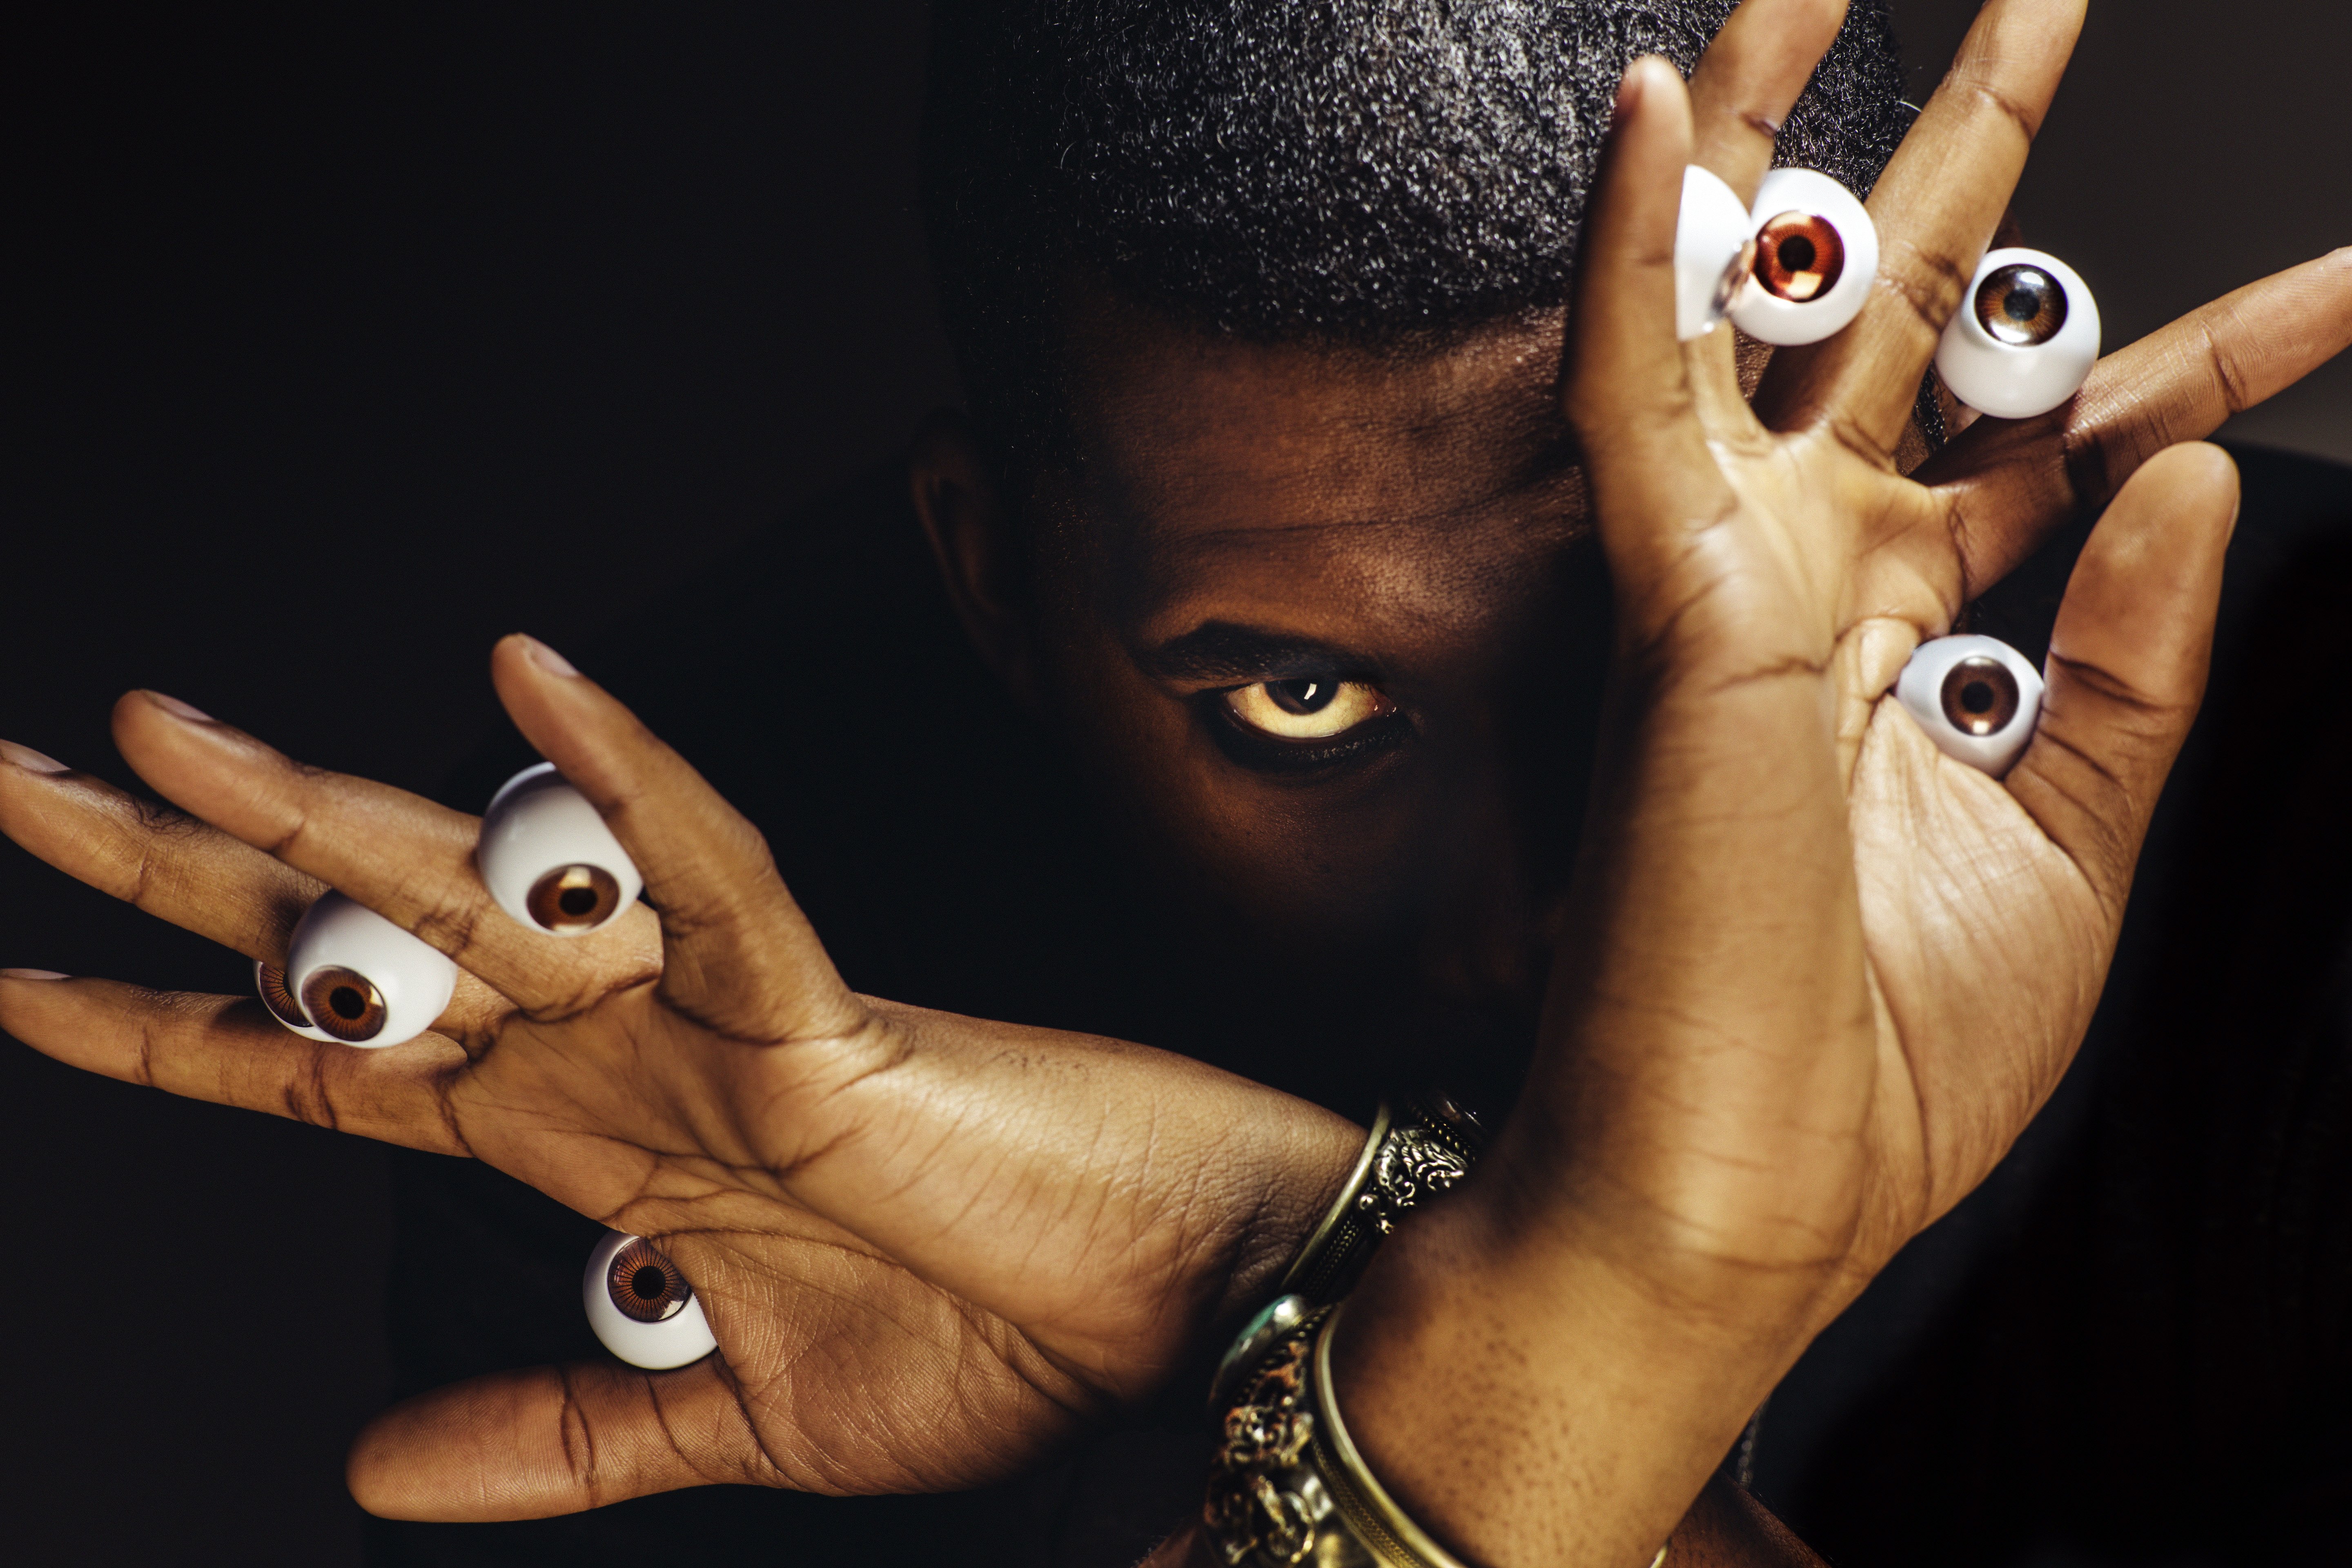 Picture for Features, Sunday Review, Music Lead. Publicity Image of Steven Ellison, known by his stage name Flying Lotus, is an experimental multi-genre music producer, electronic musician and rapper from Los Angeles, California. UNDATED HANDOUT. [19OCTOBER2014 REVIEW MUSIC LEAD]